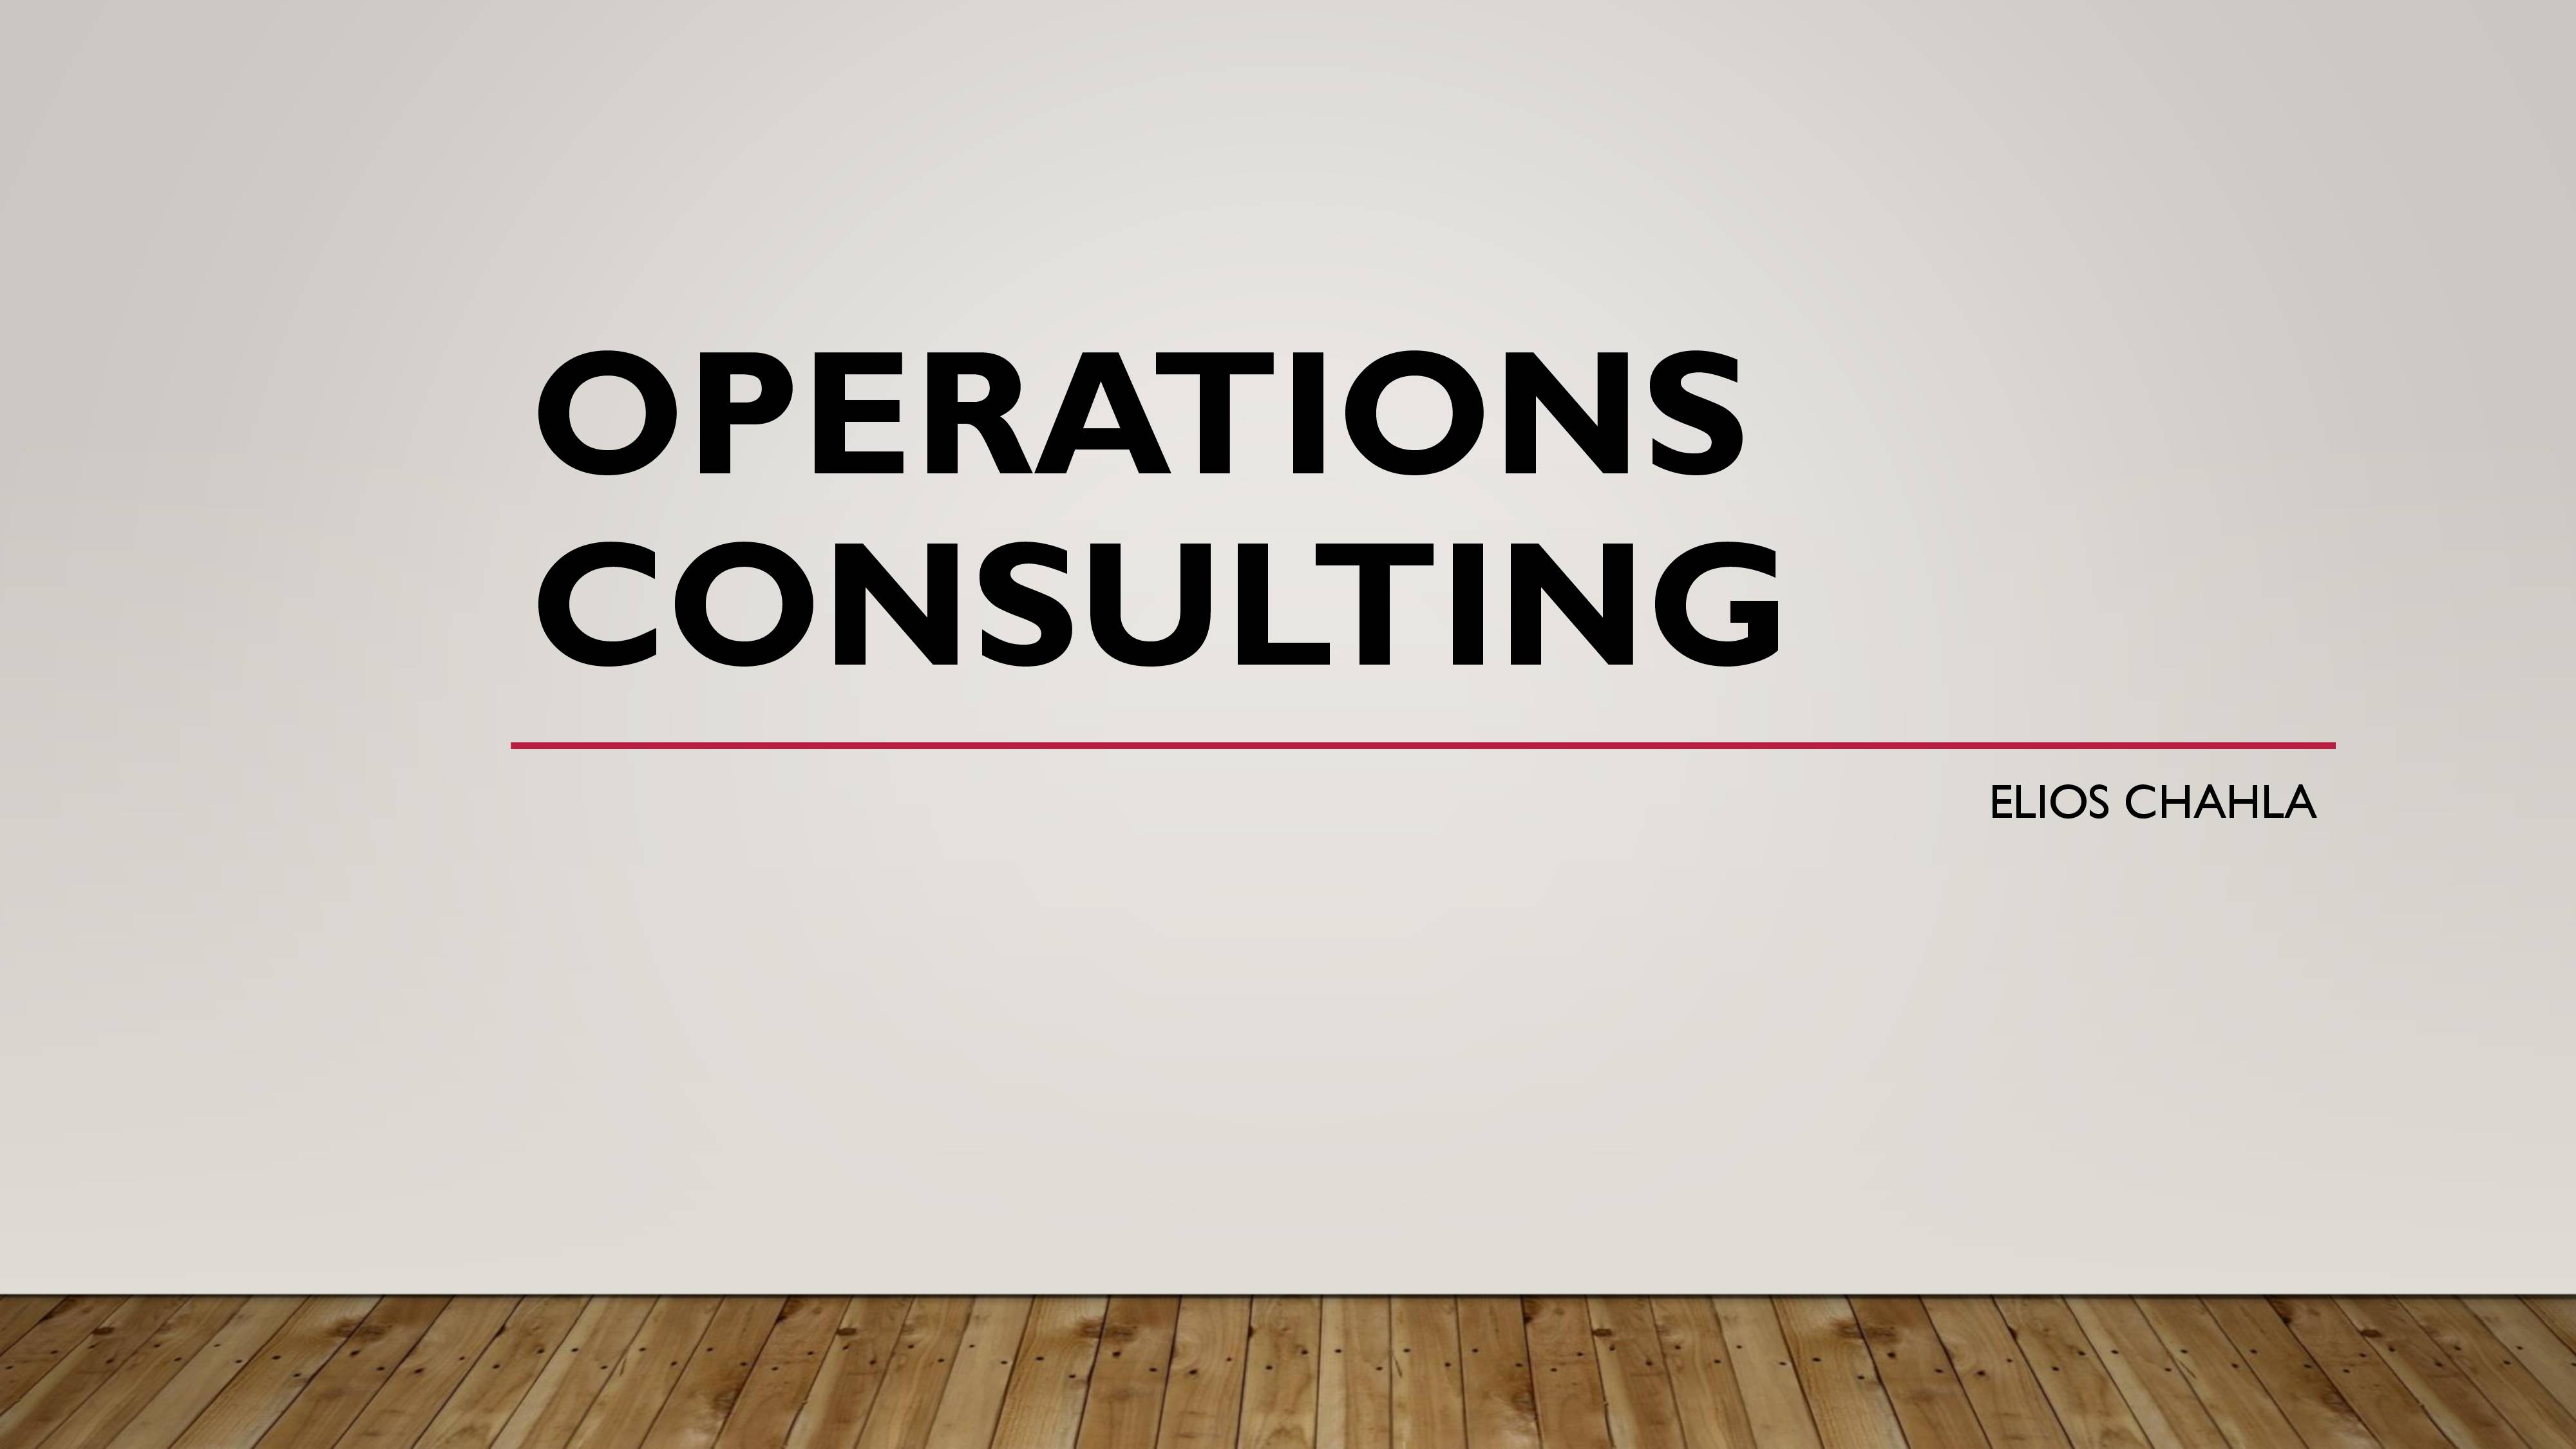 PPT on Operations Consulting